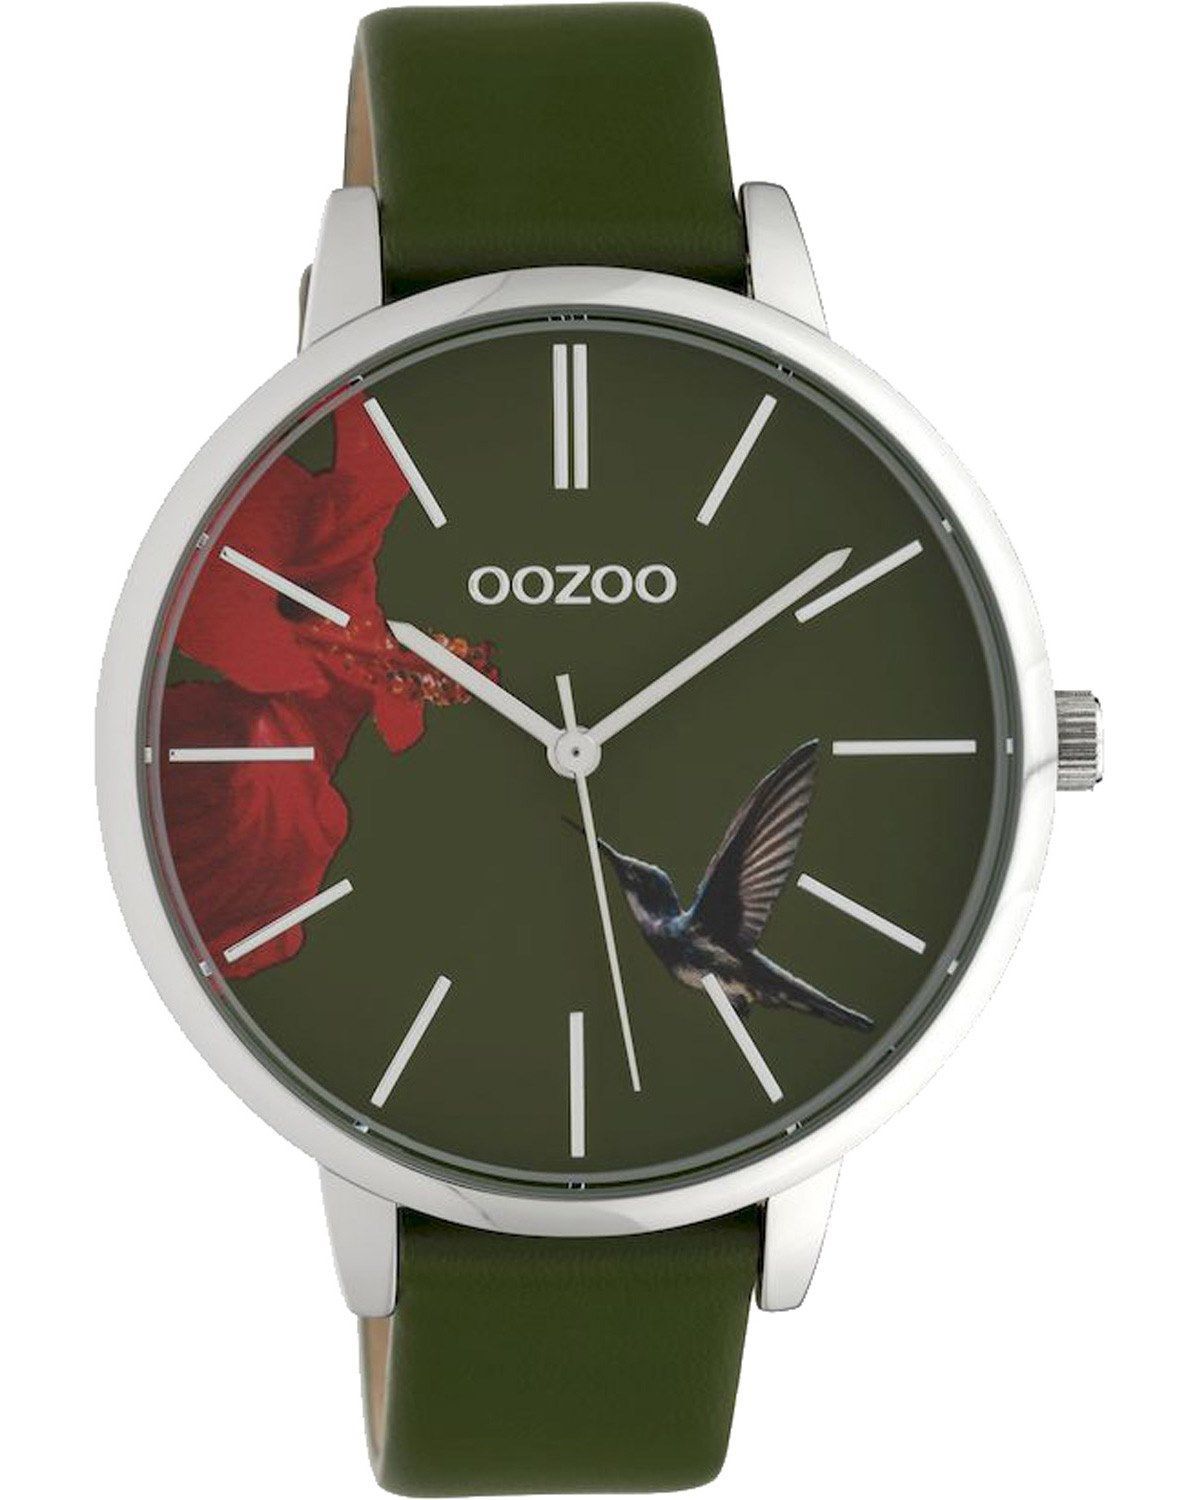 OOZOO Timepieces Limited Blue Leather Strap C10185